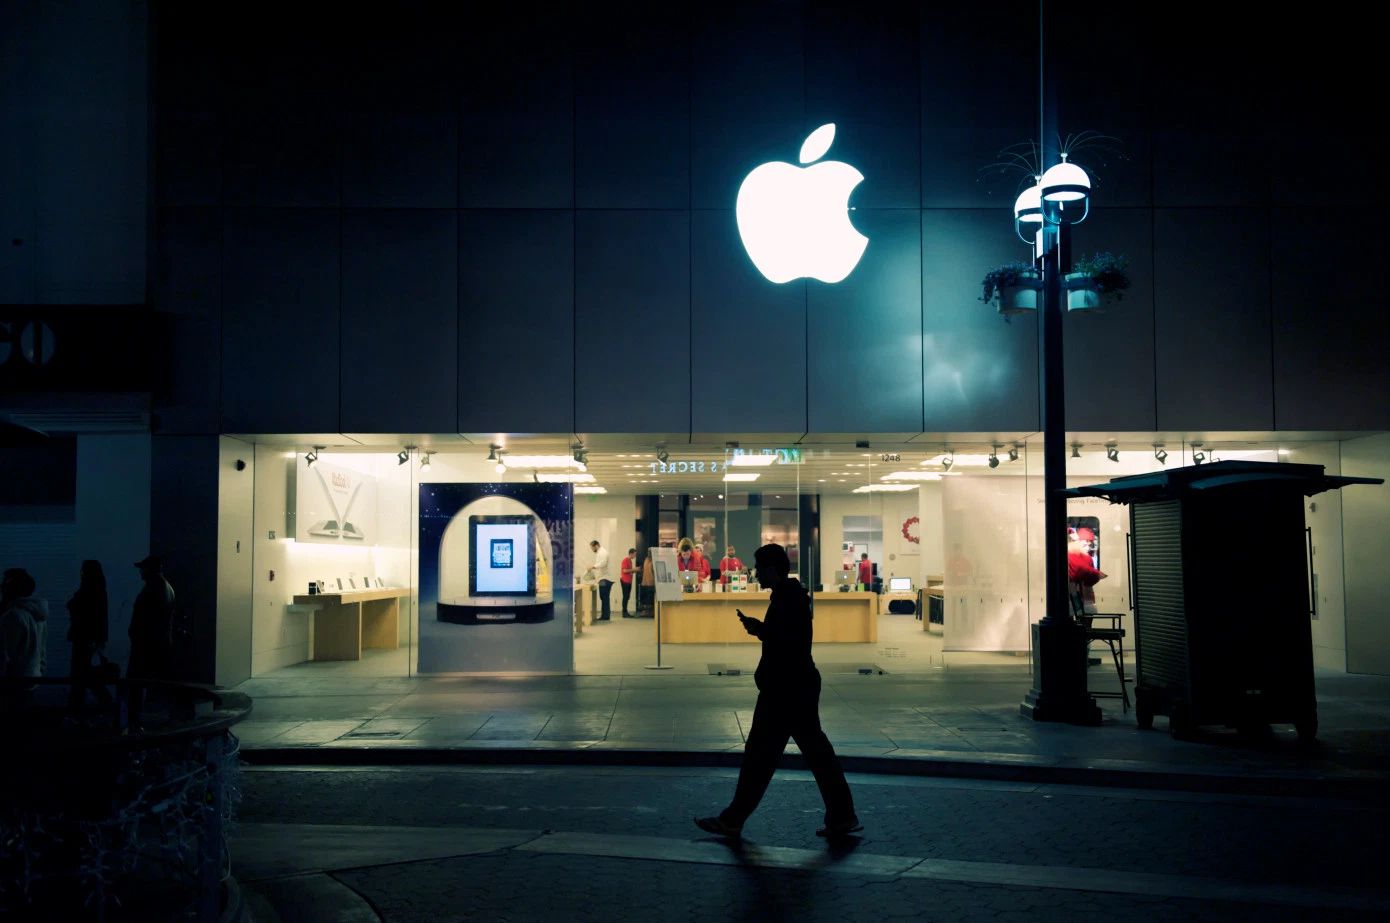 All Apple Retail Stores Outside of Greater China Closed Through March 27